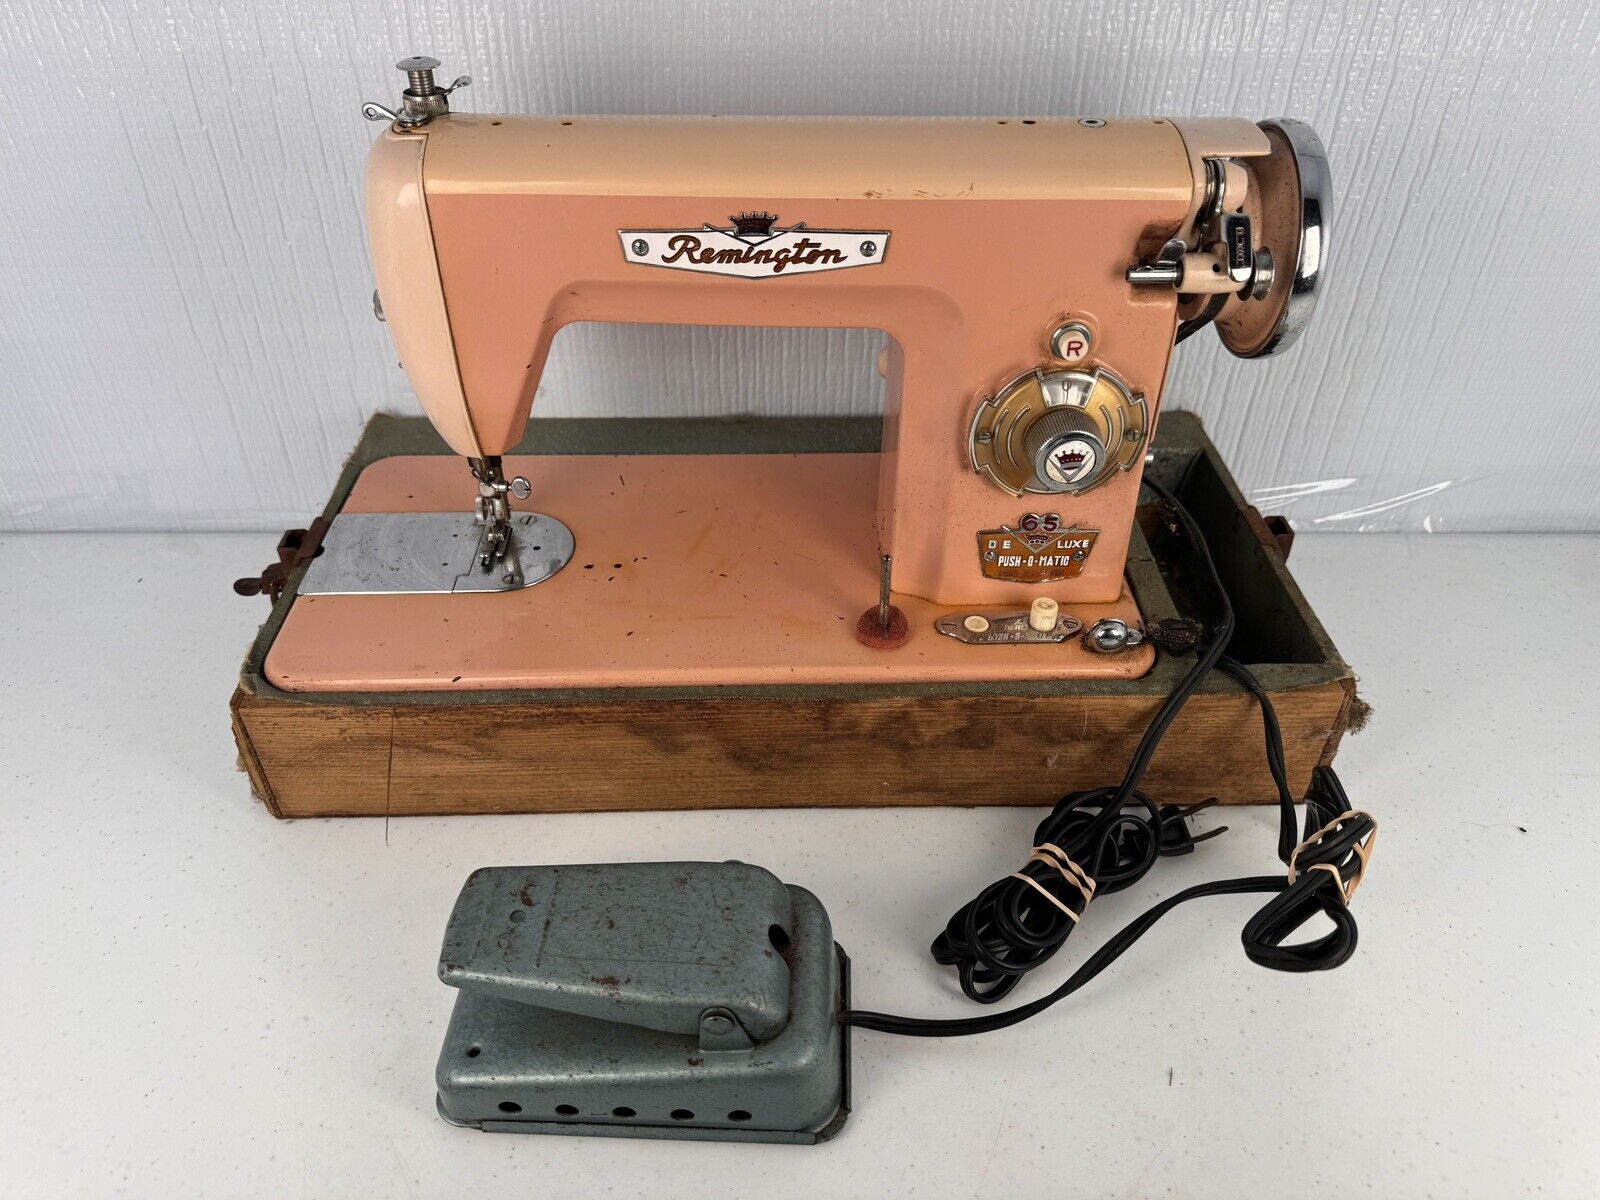 Rare Vintage Remington 65 Deluxe Push-O-Matic Sewing Machine Made In Japan READ